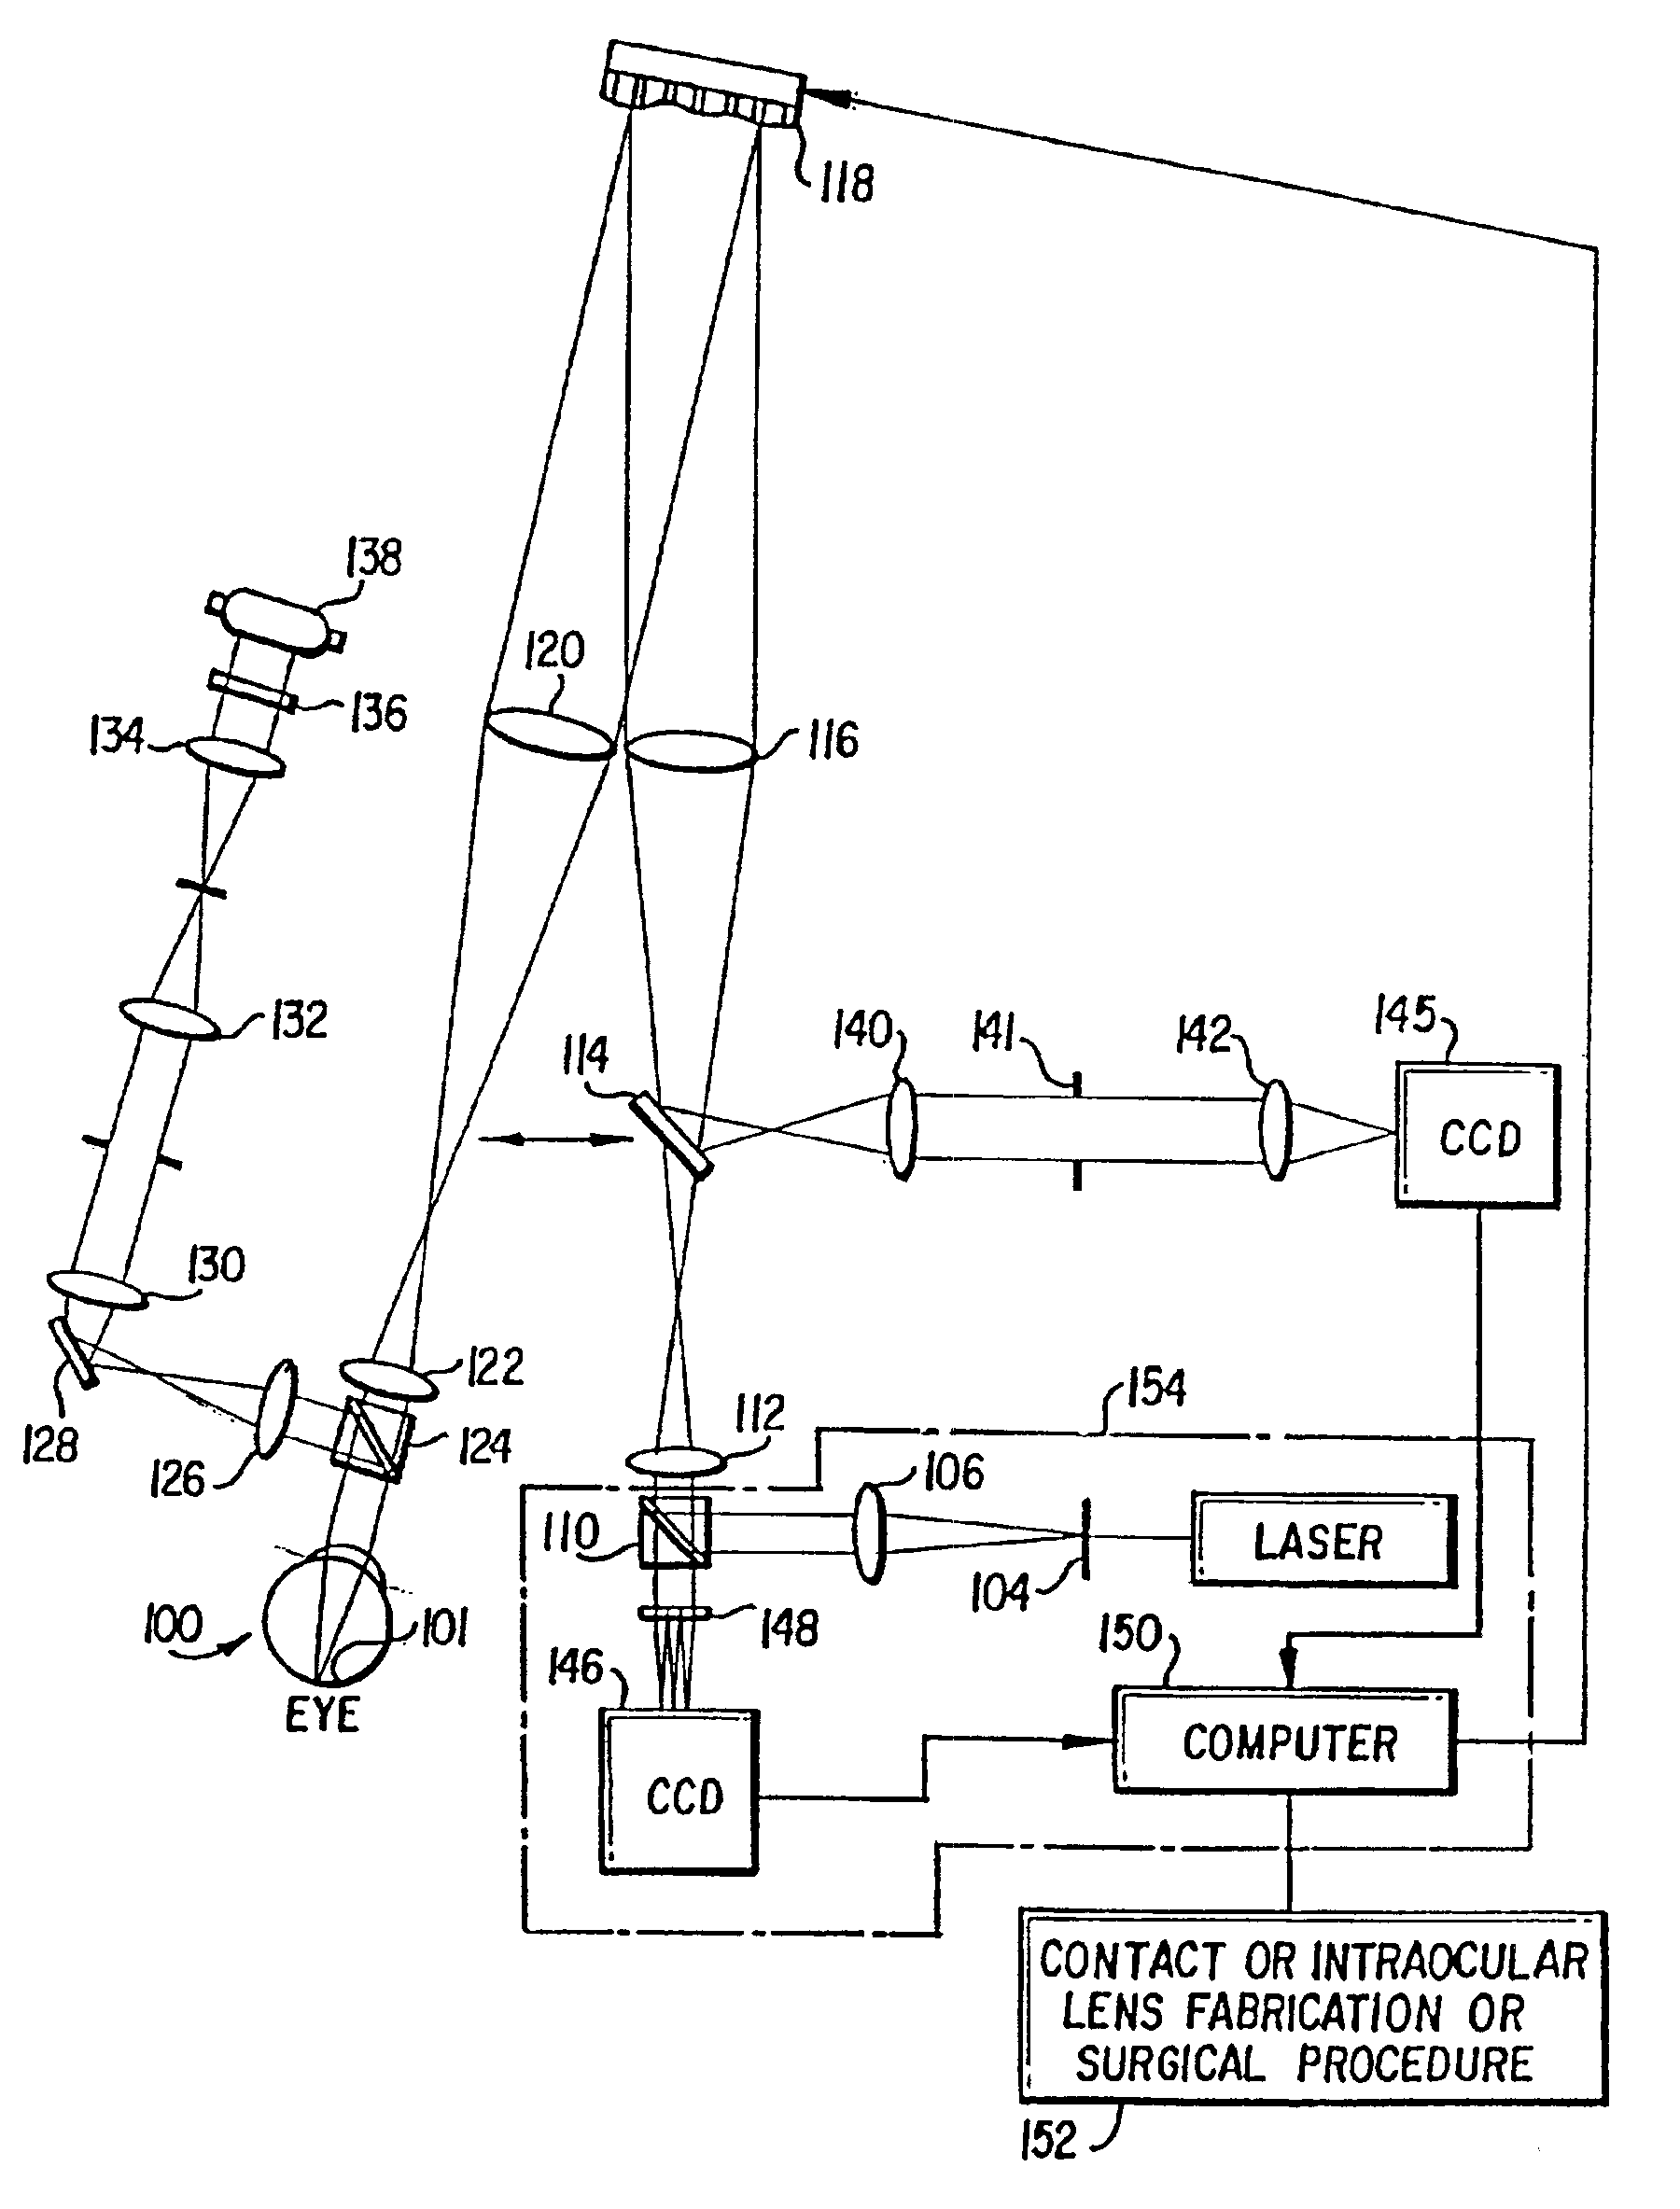 Method and apparatus for improving vision and the resolution of retinal images